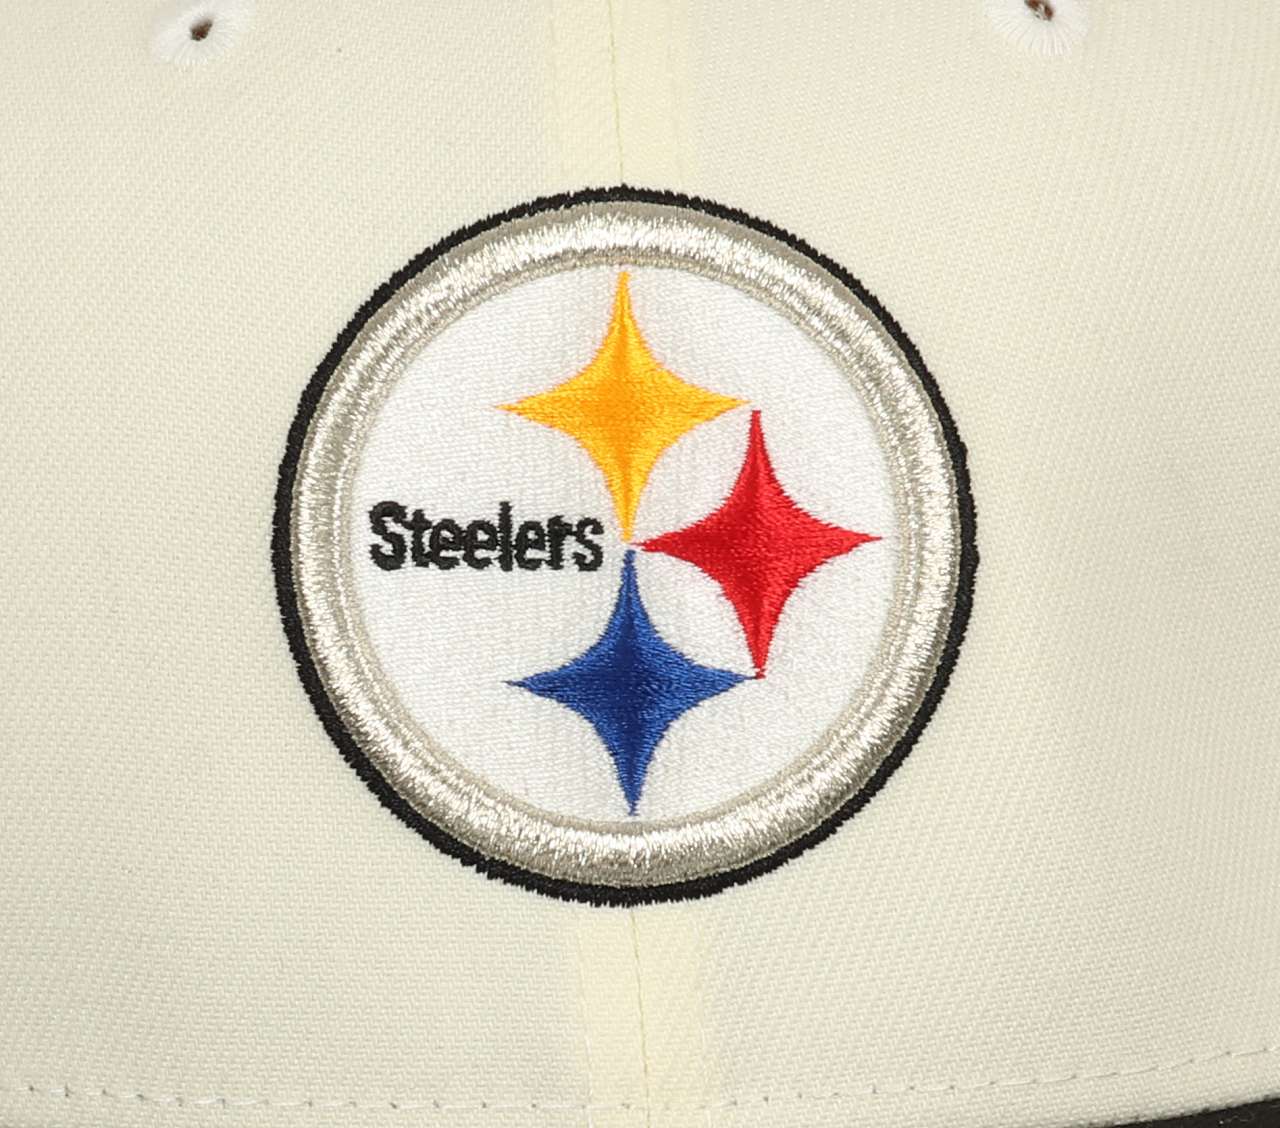 Pittsburgh Steelers NFL Pro Bowl 1991 Sidepatch Chrome 9Fifty Snapback Cap New Era